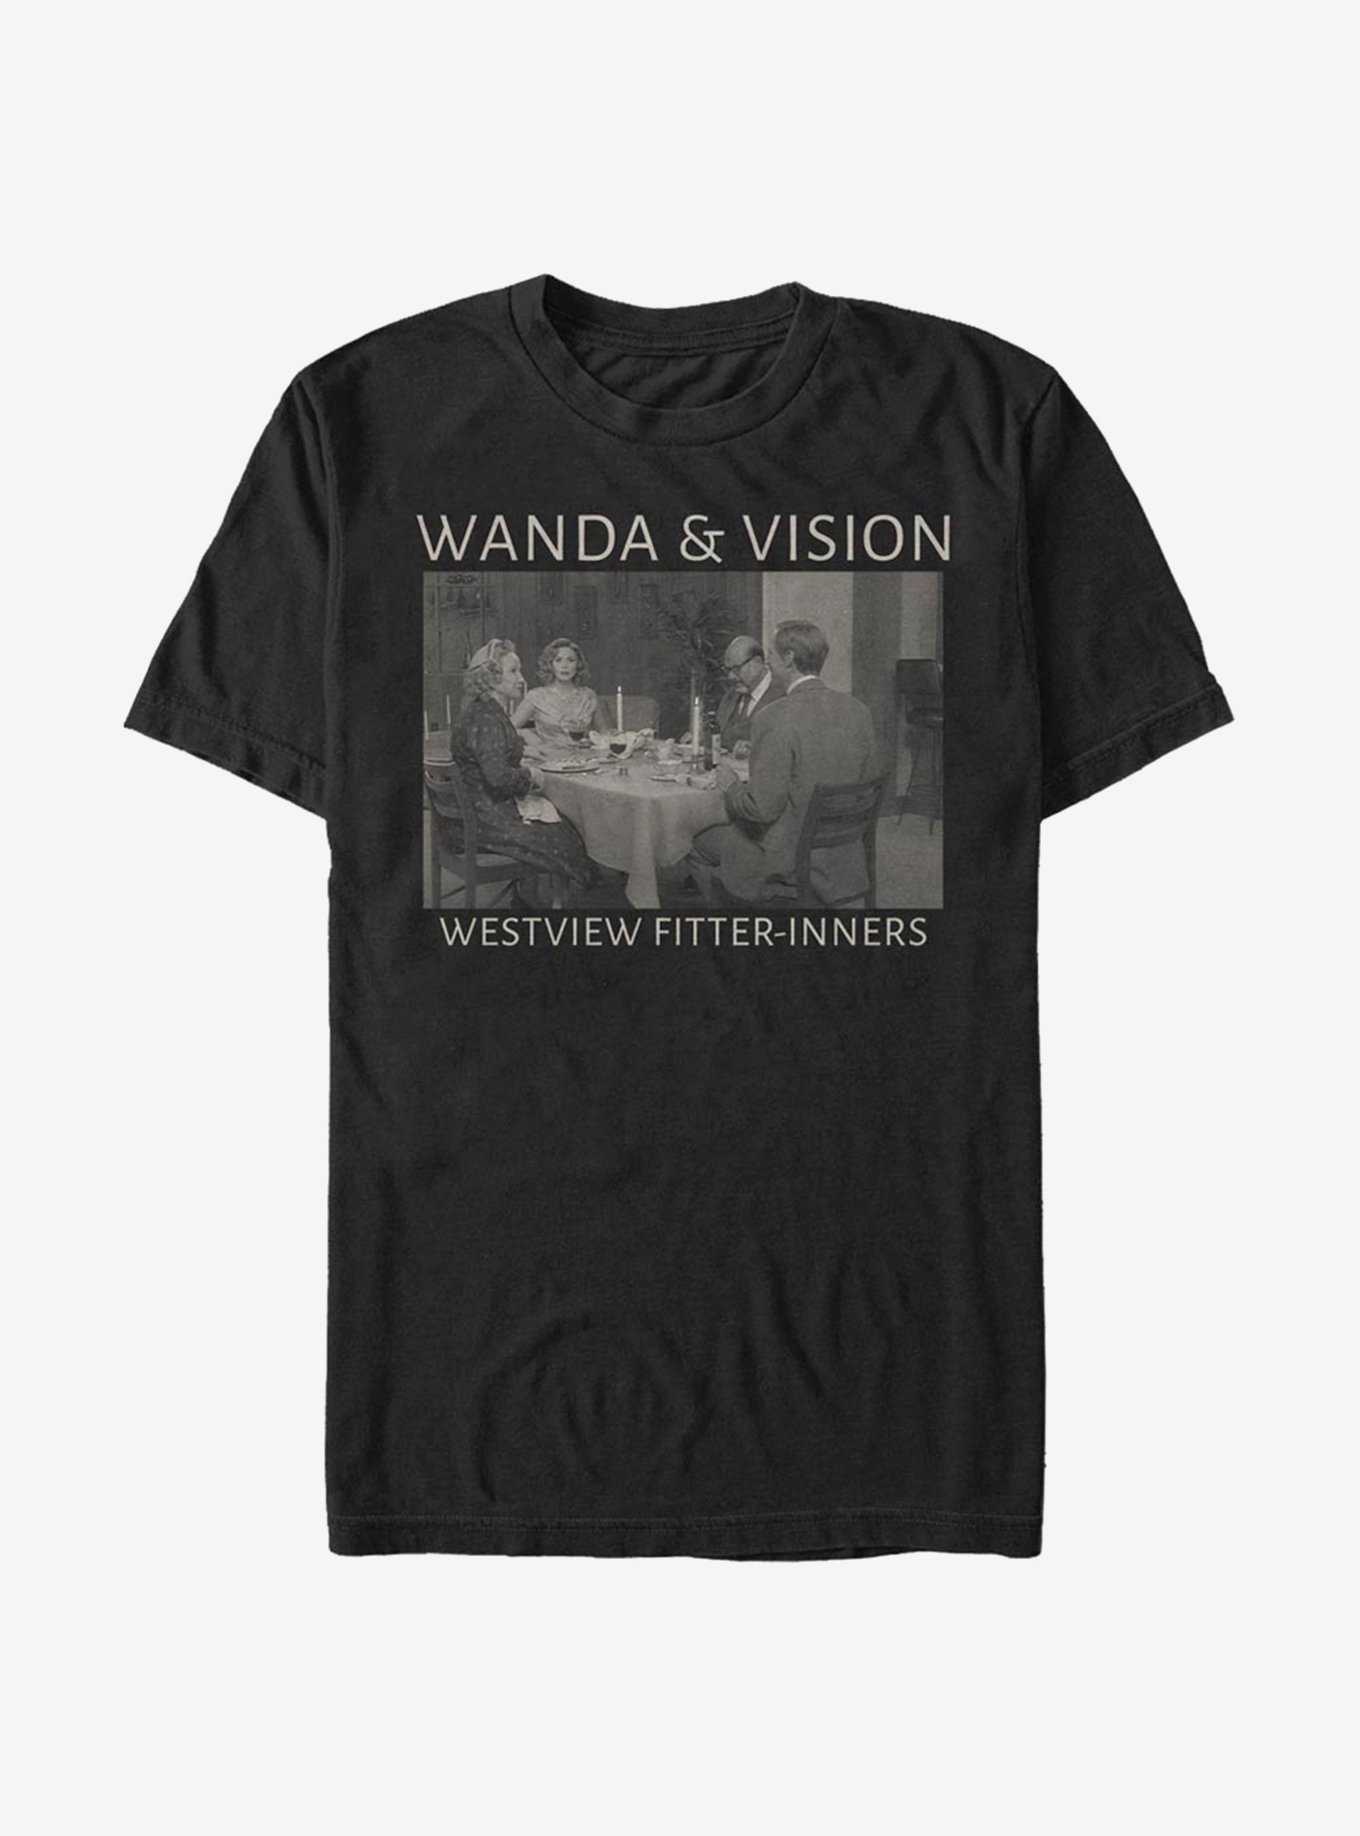 Extra Soft Marvel WandaVision Fitter-Inners T-Shirt, , hi-res